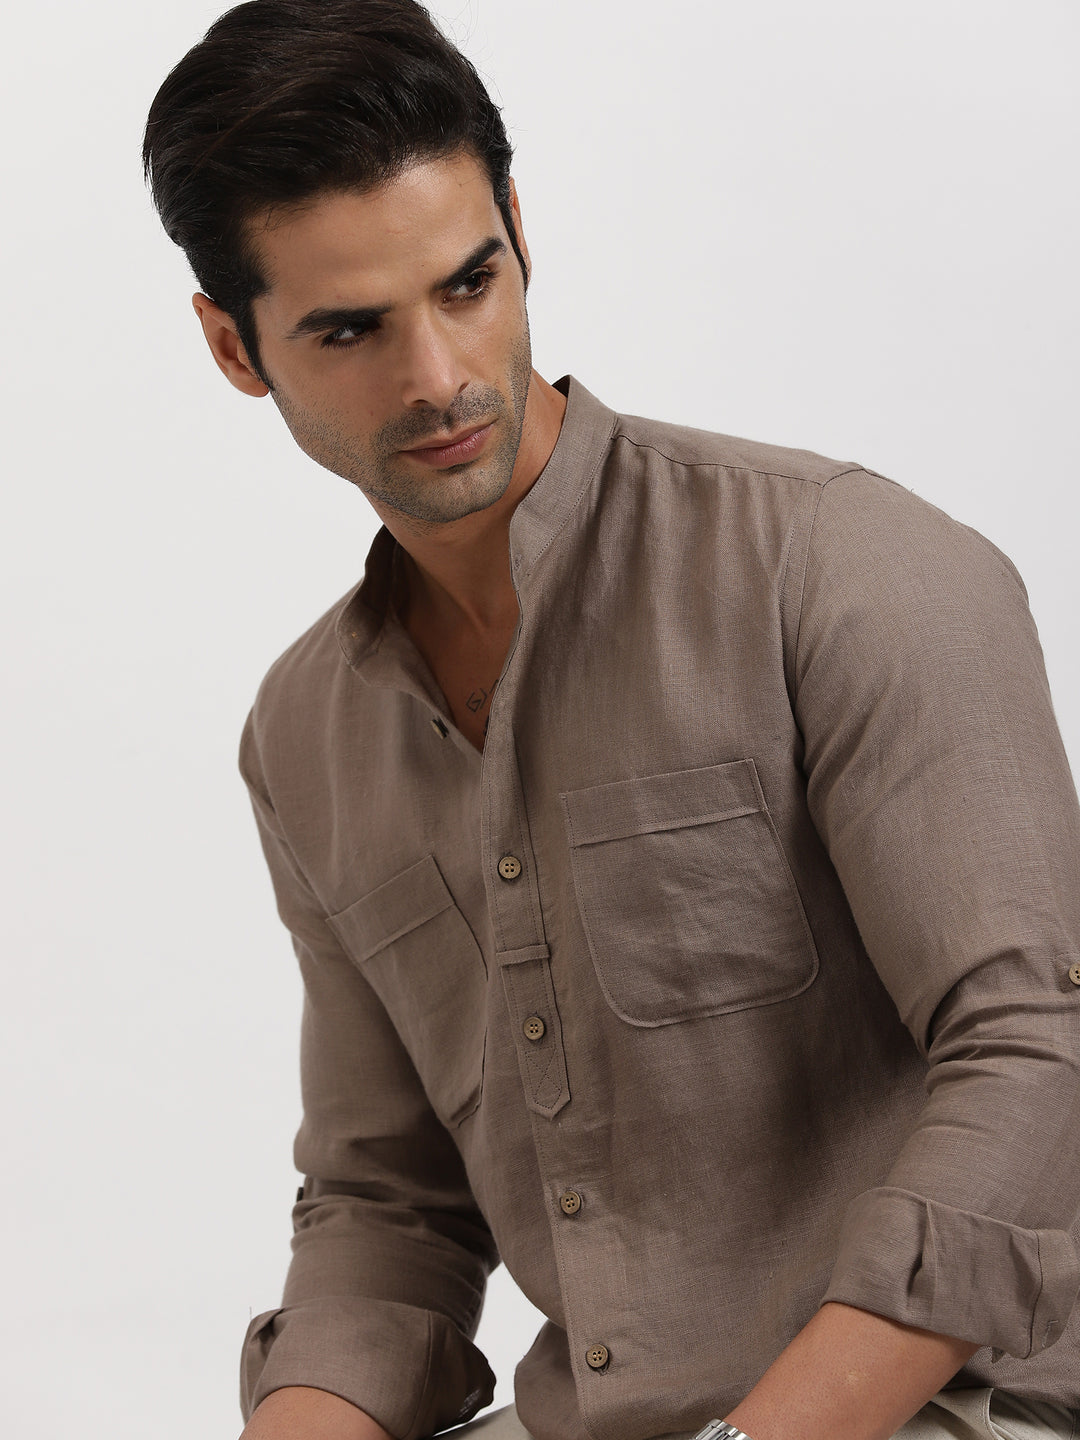 Luca - Pure Linen Double Pocket Full Sleeve Shirt - Sepia Brown